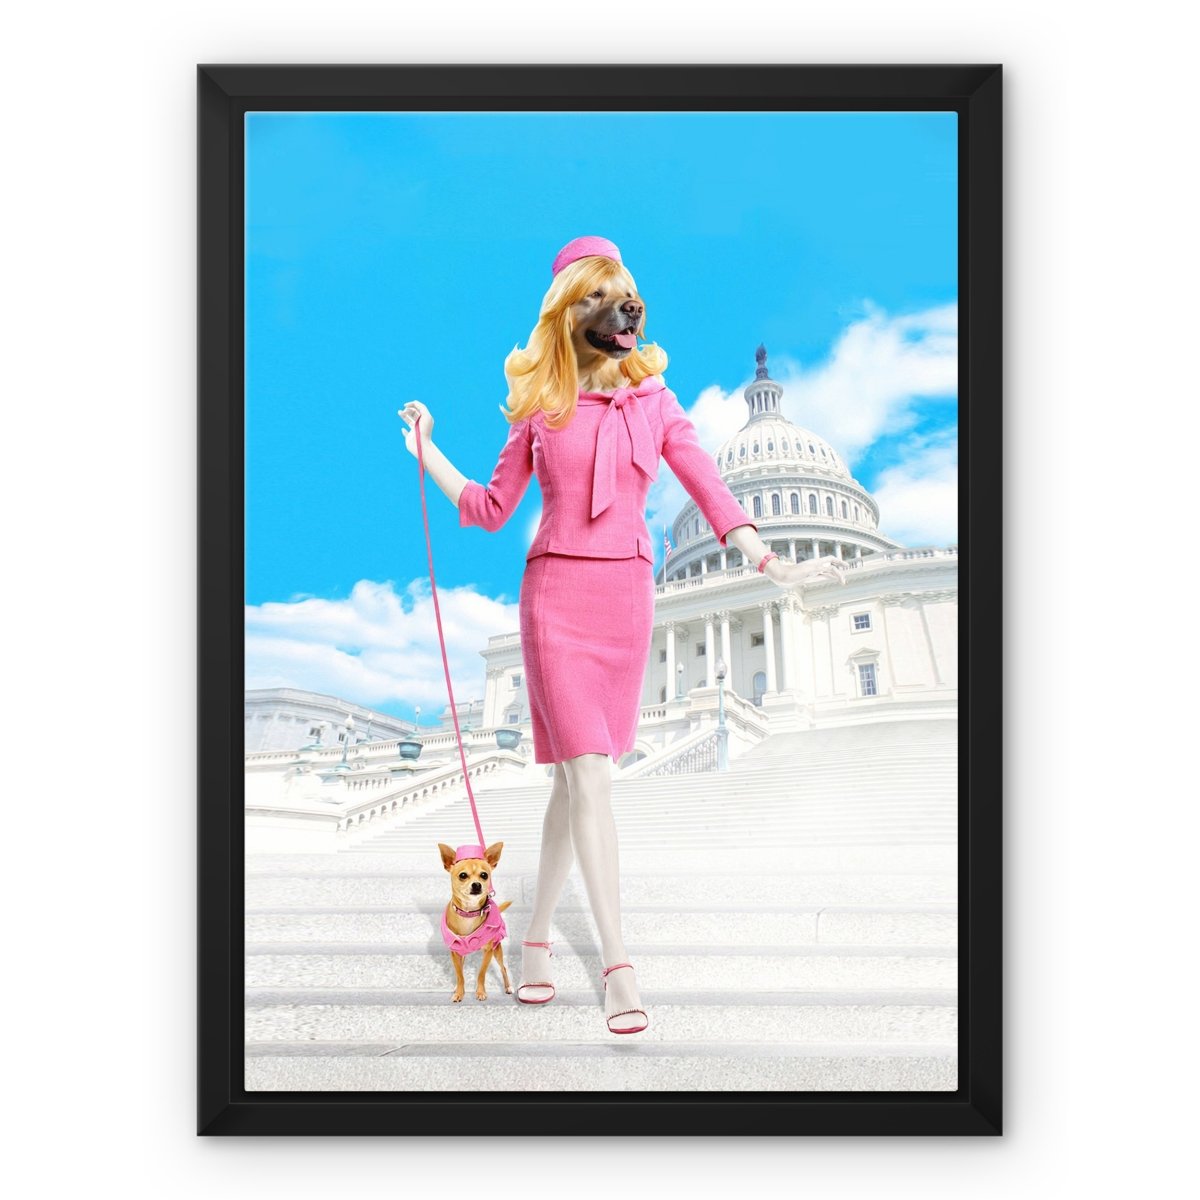 Legally Blonde: Custom Pet Canvas - Paw & Glory - #pet portraits# - #dog portraits# - #pet portraits uk#paw & glory, custom pet portrait canvas,my pet canvas blanket, pet on canvas reviews, personalized dog and owner canvas uk, pet canvas uk, pet canvas portrait, the pet on canvas